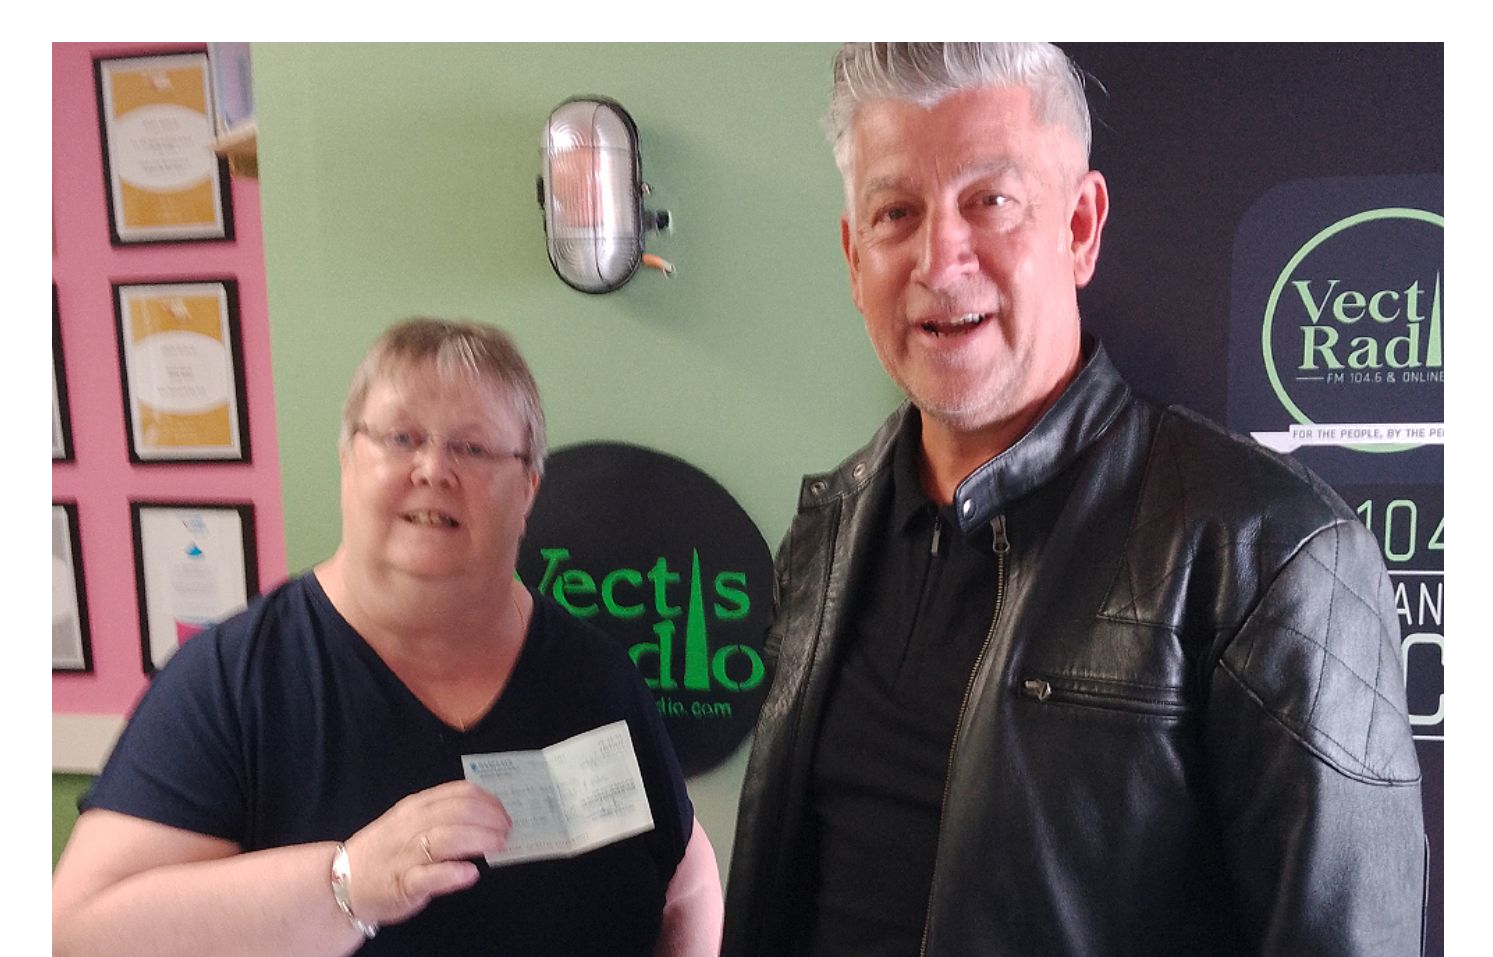 Isle of Wight/England - Local Freemasons support Vectis Radio's 4PS project